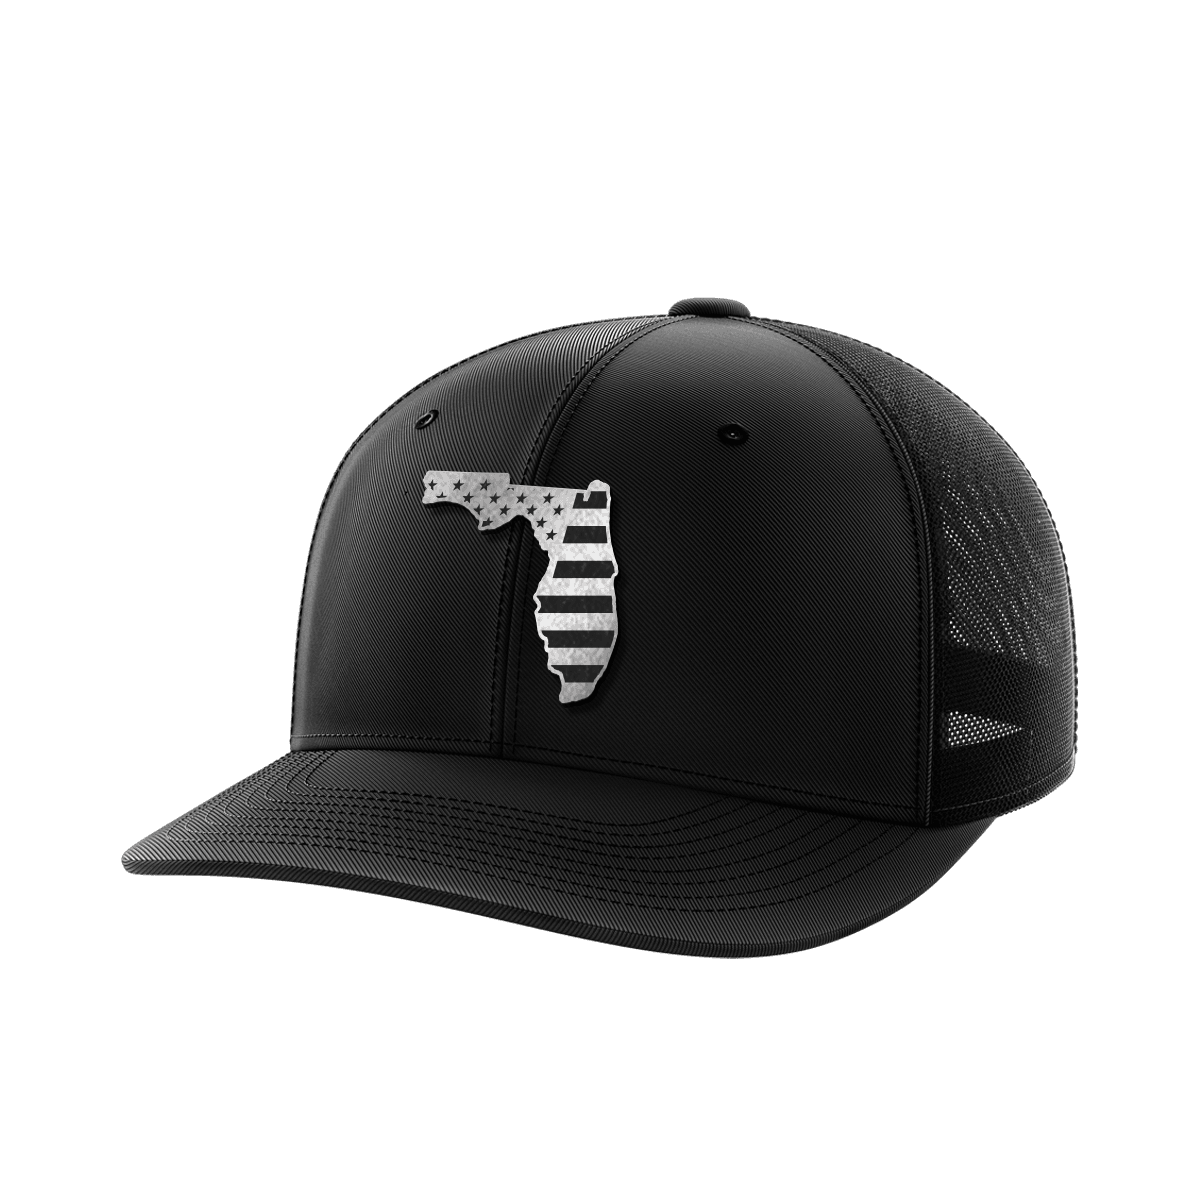 Florida United Collection (black leather) - Greater Half